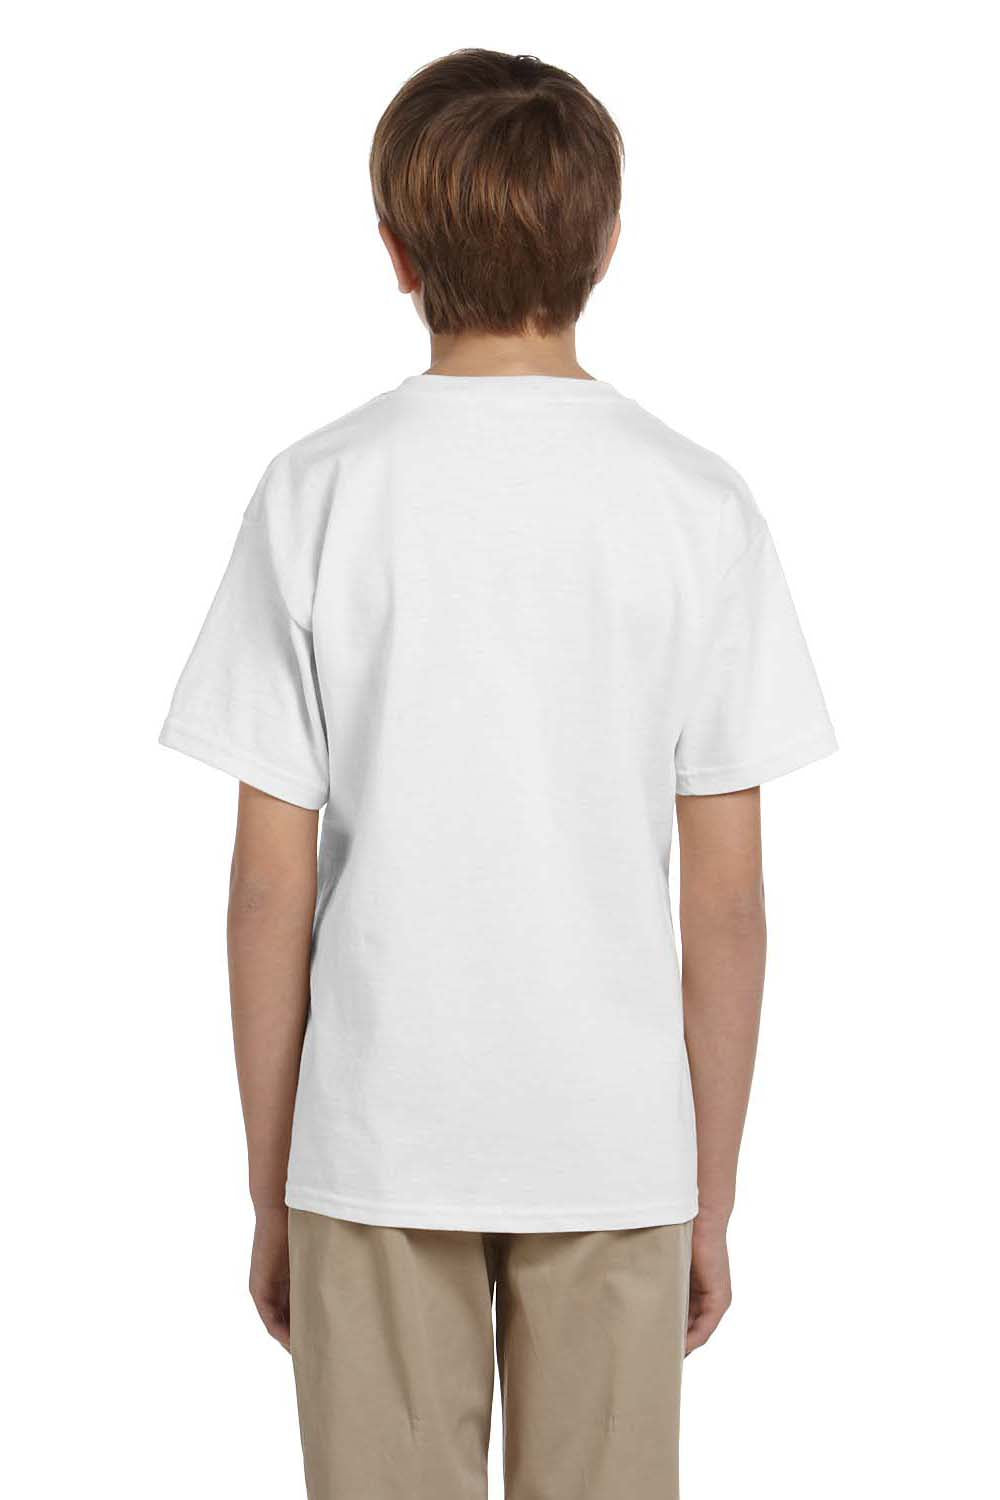 Fruit Of The Loom 3931B Youth HD Jersey Short Sleeve Crewneck T-Shirt White Back